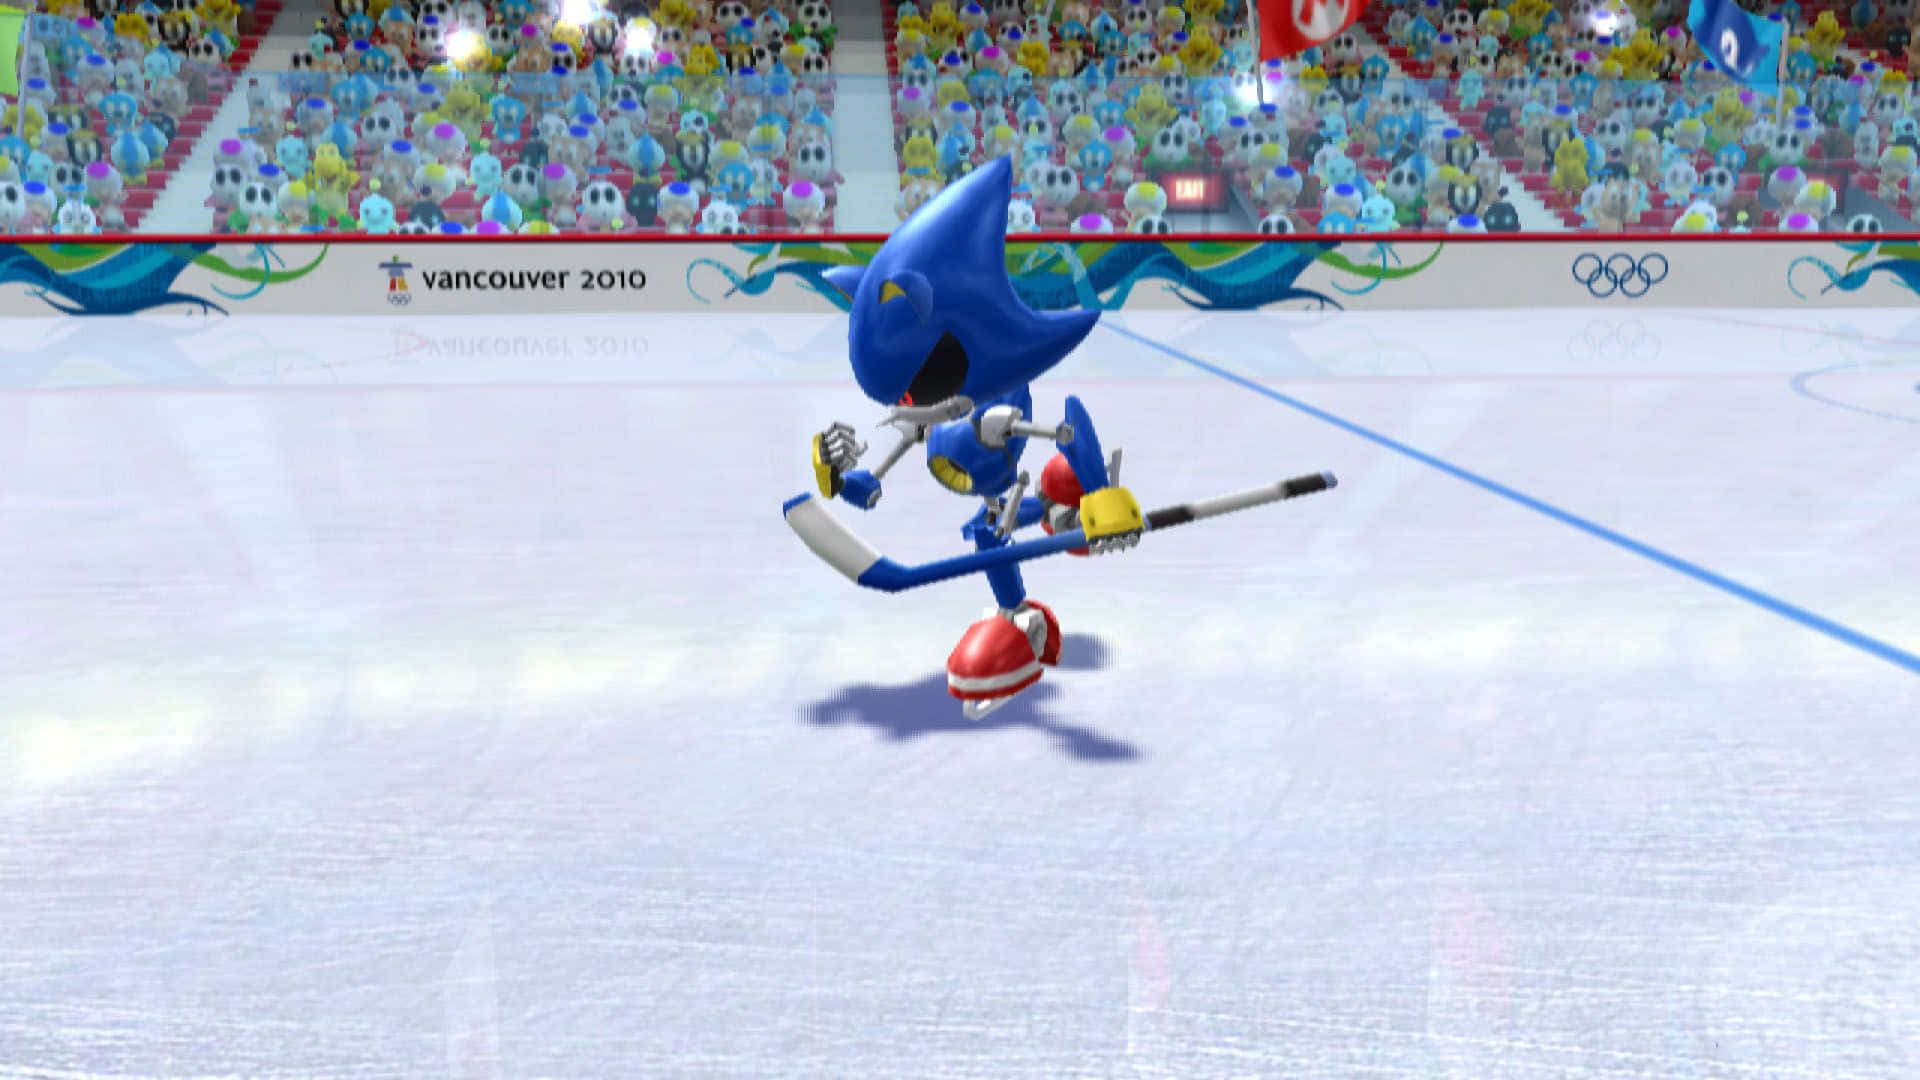 Caption: Thrilling Winter Games Action Wallpaper